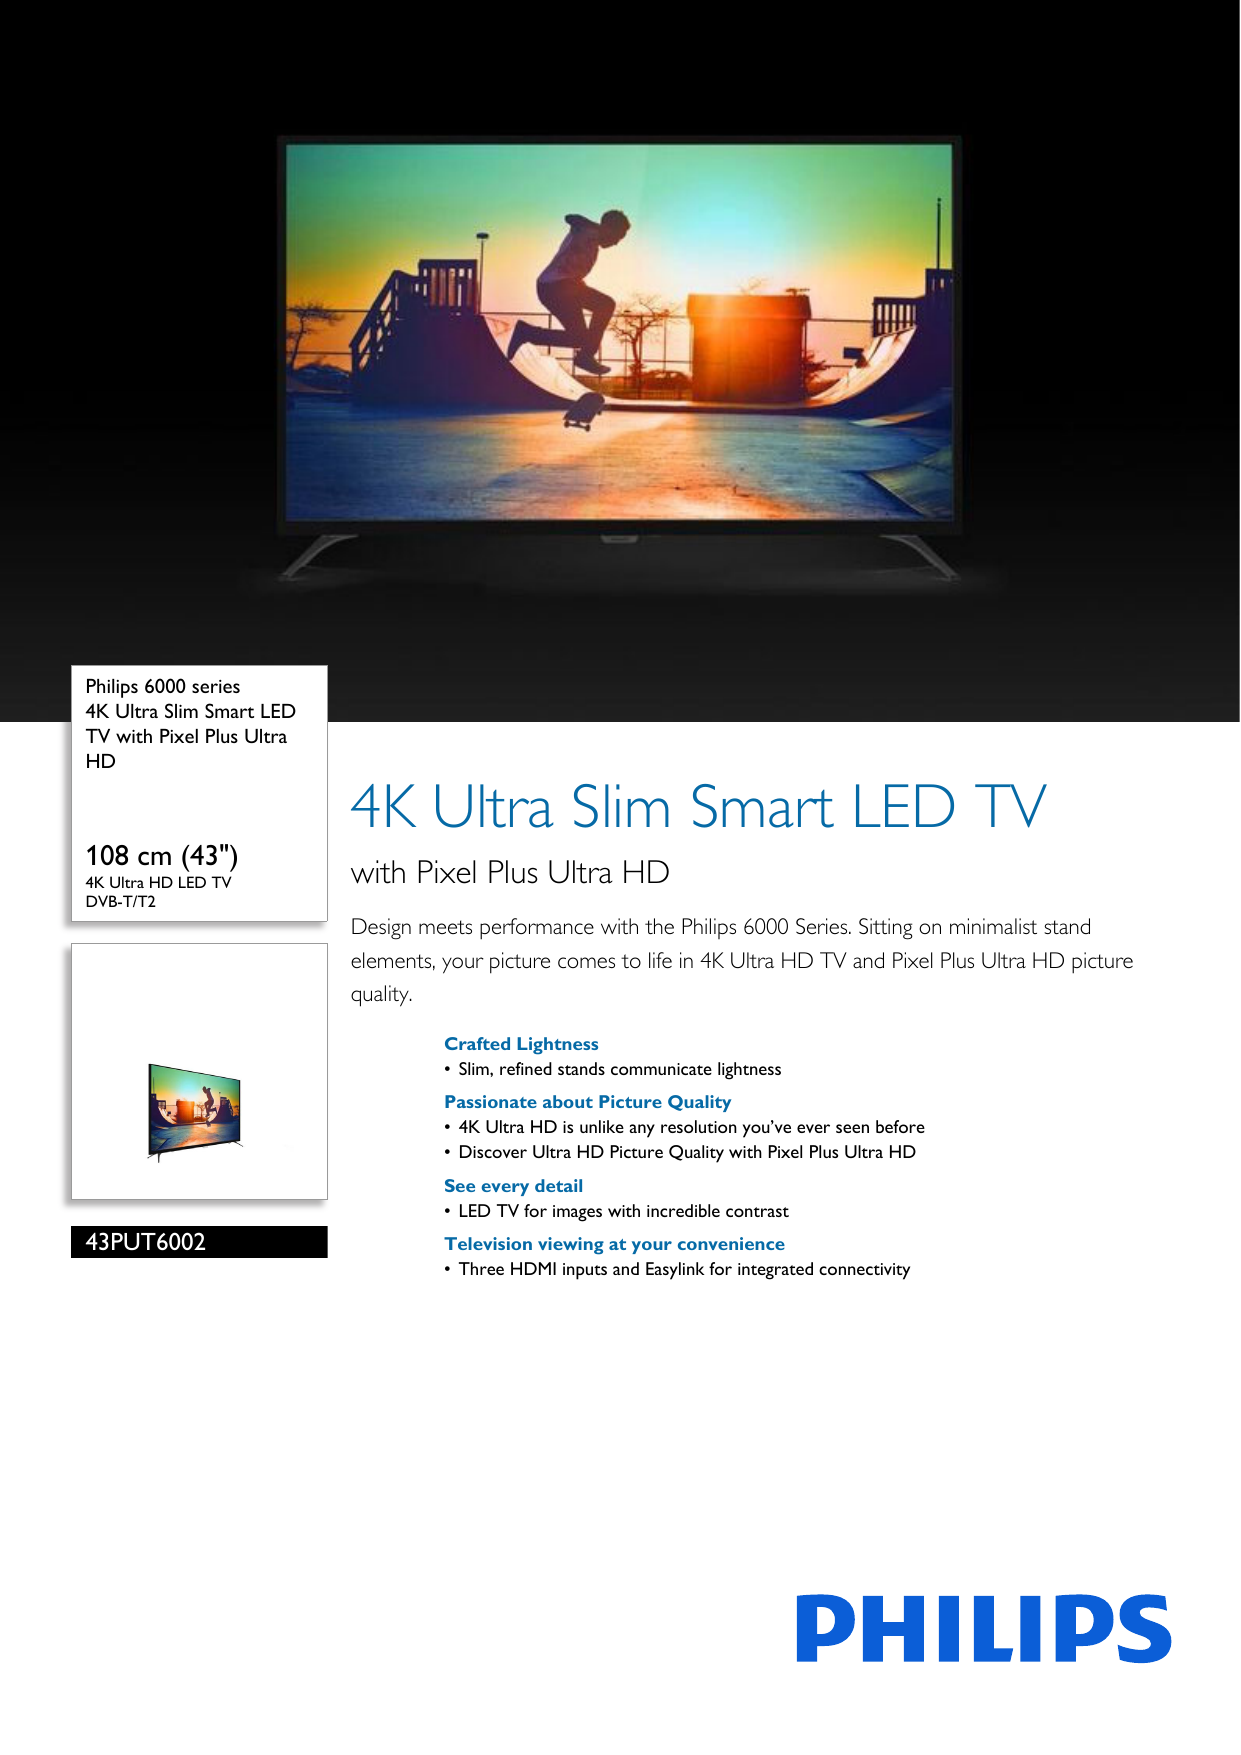 Page 1 of 3 - Philips 43PUT6002/98 4K Ultra Slim Smart LED TV With Pixel Plus HD User Manual Leaflet 43put6002 98 Pss Engsg